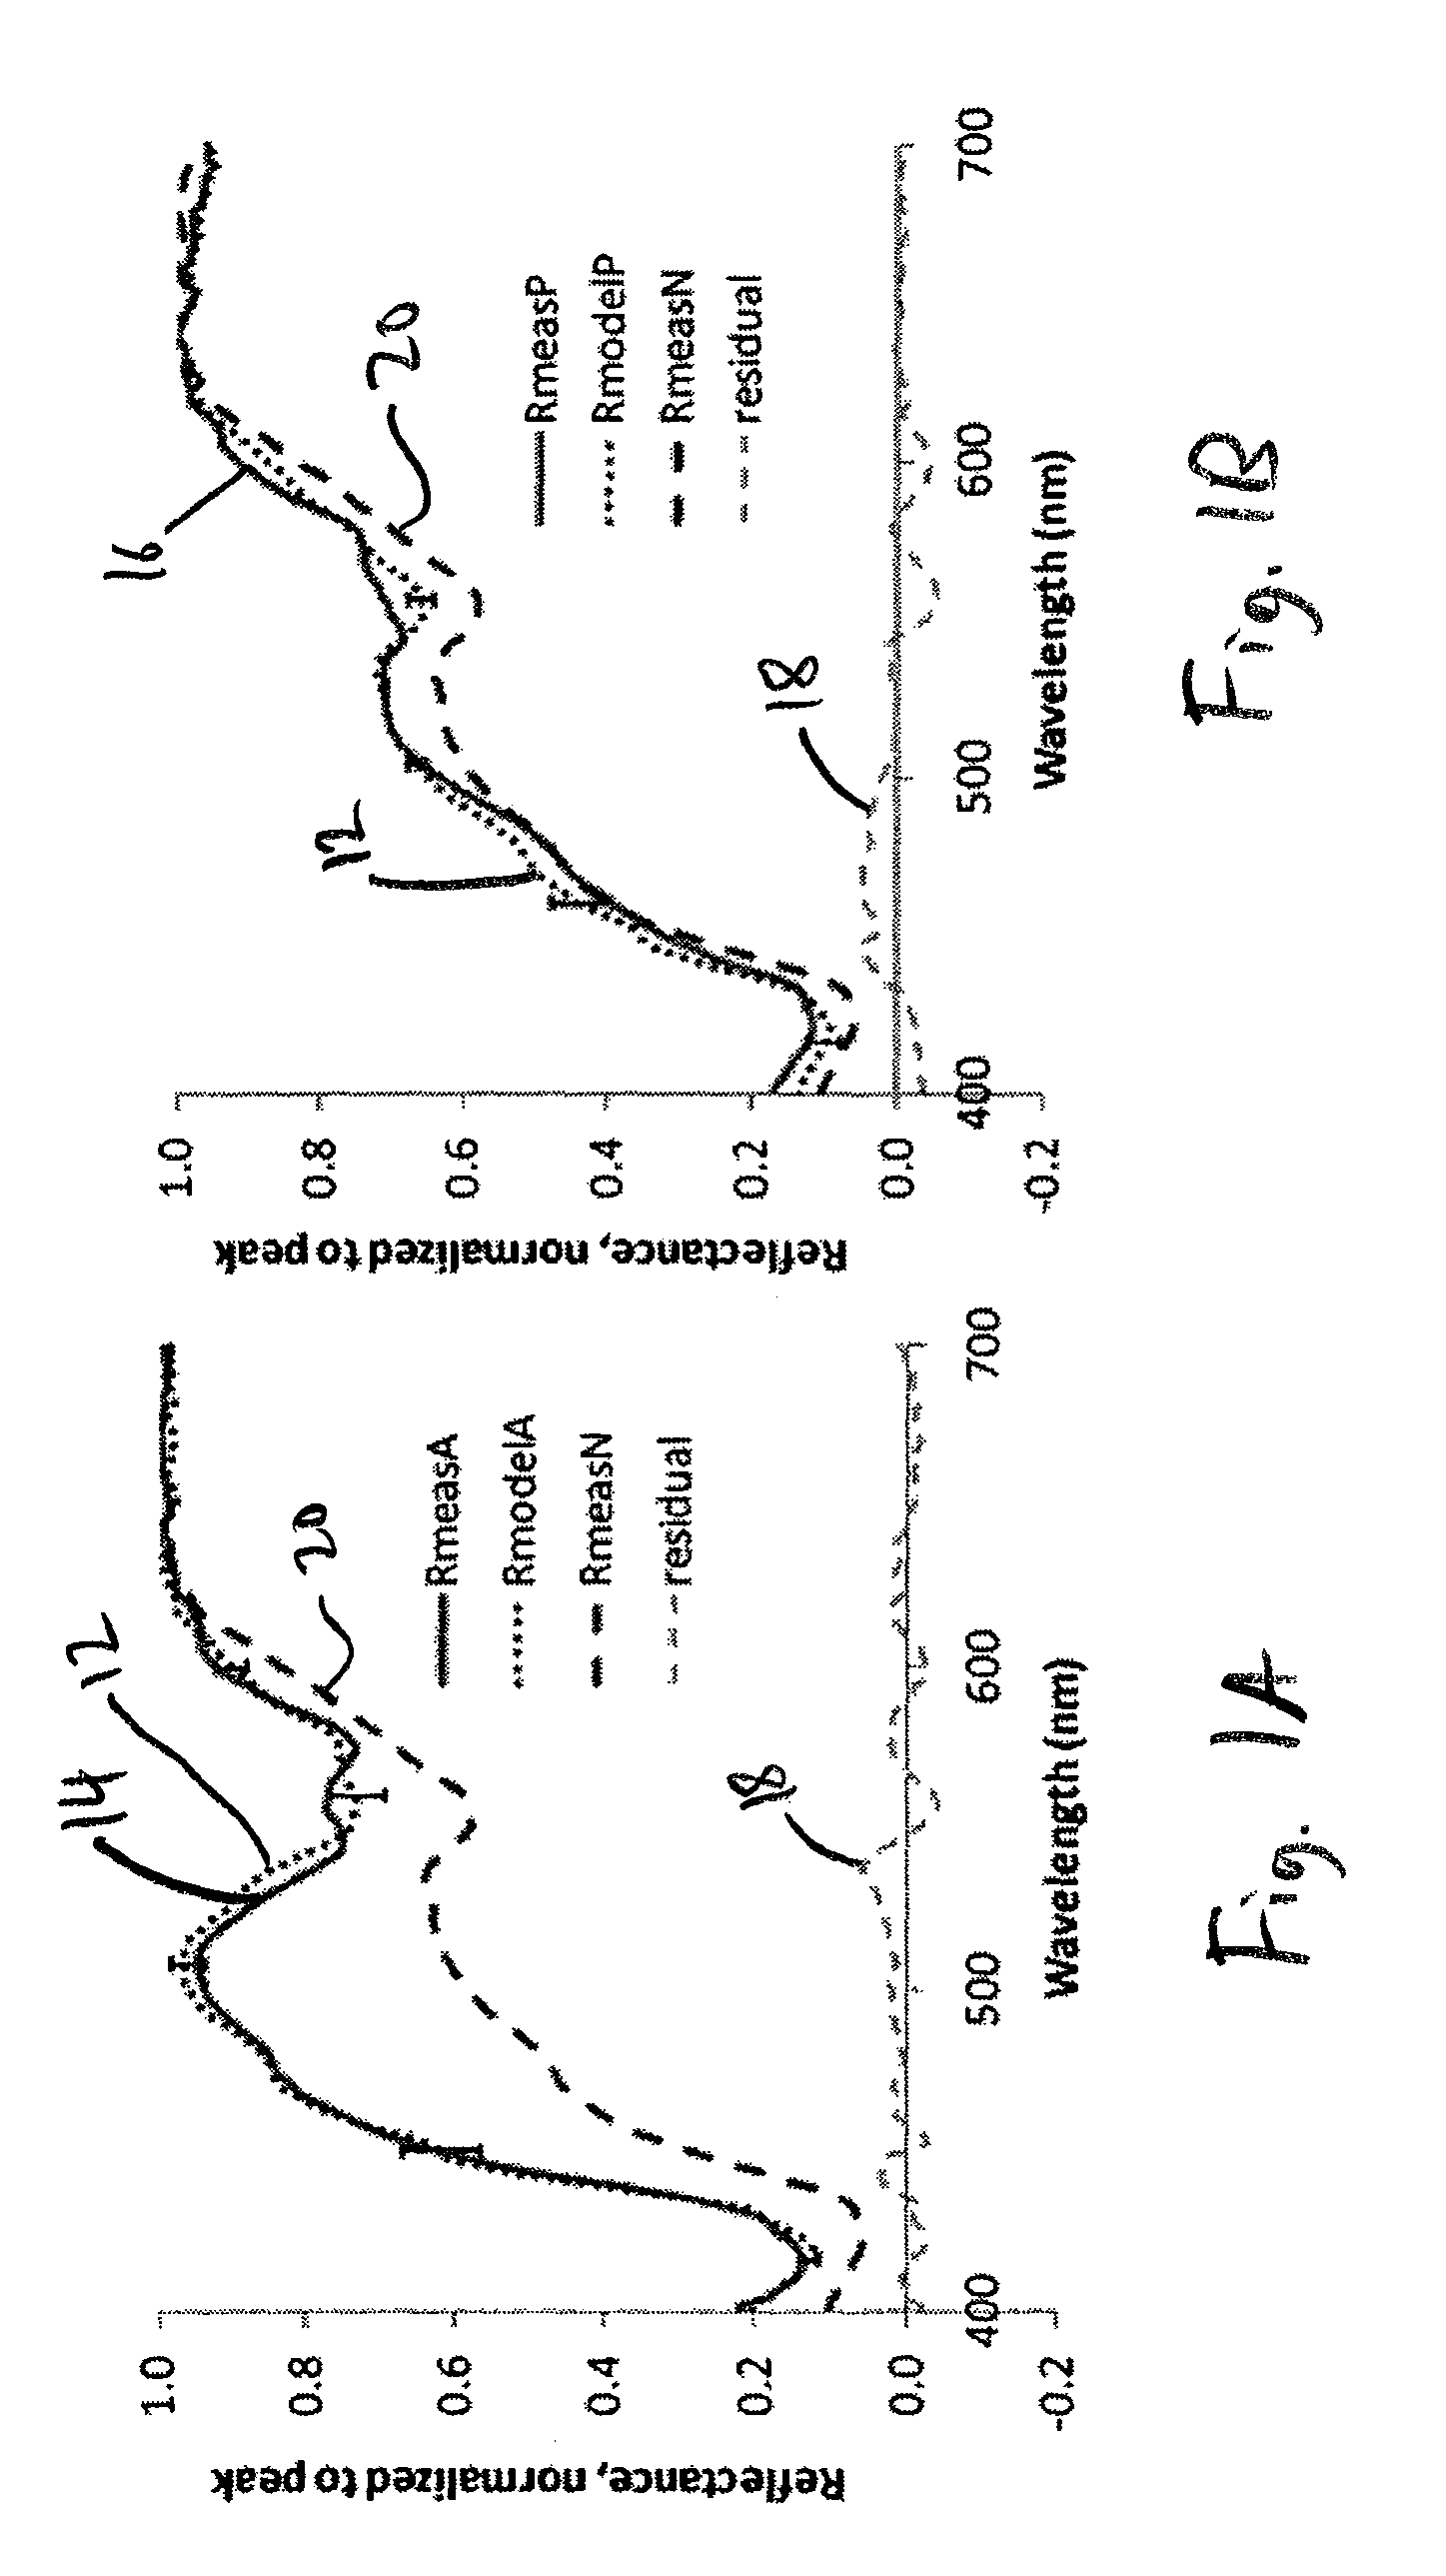 Multimodal spectroscopic systems and methods for classifying biological tissue